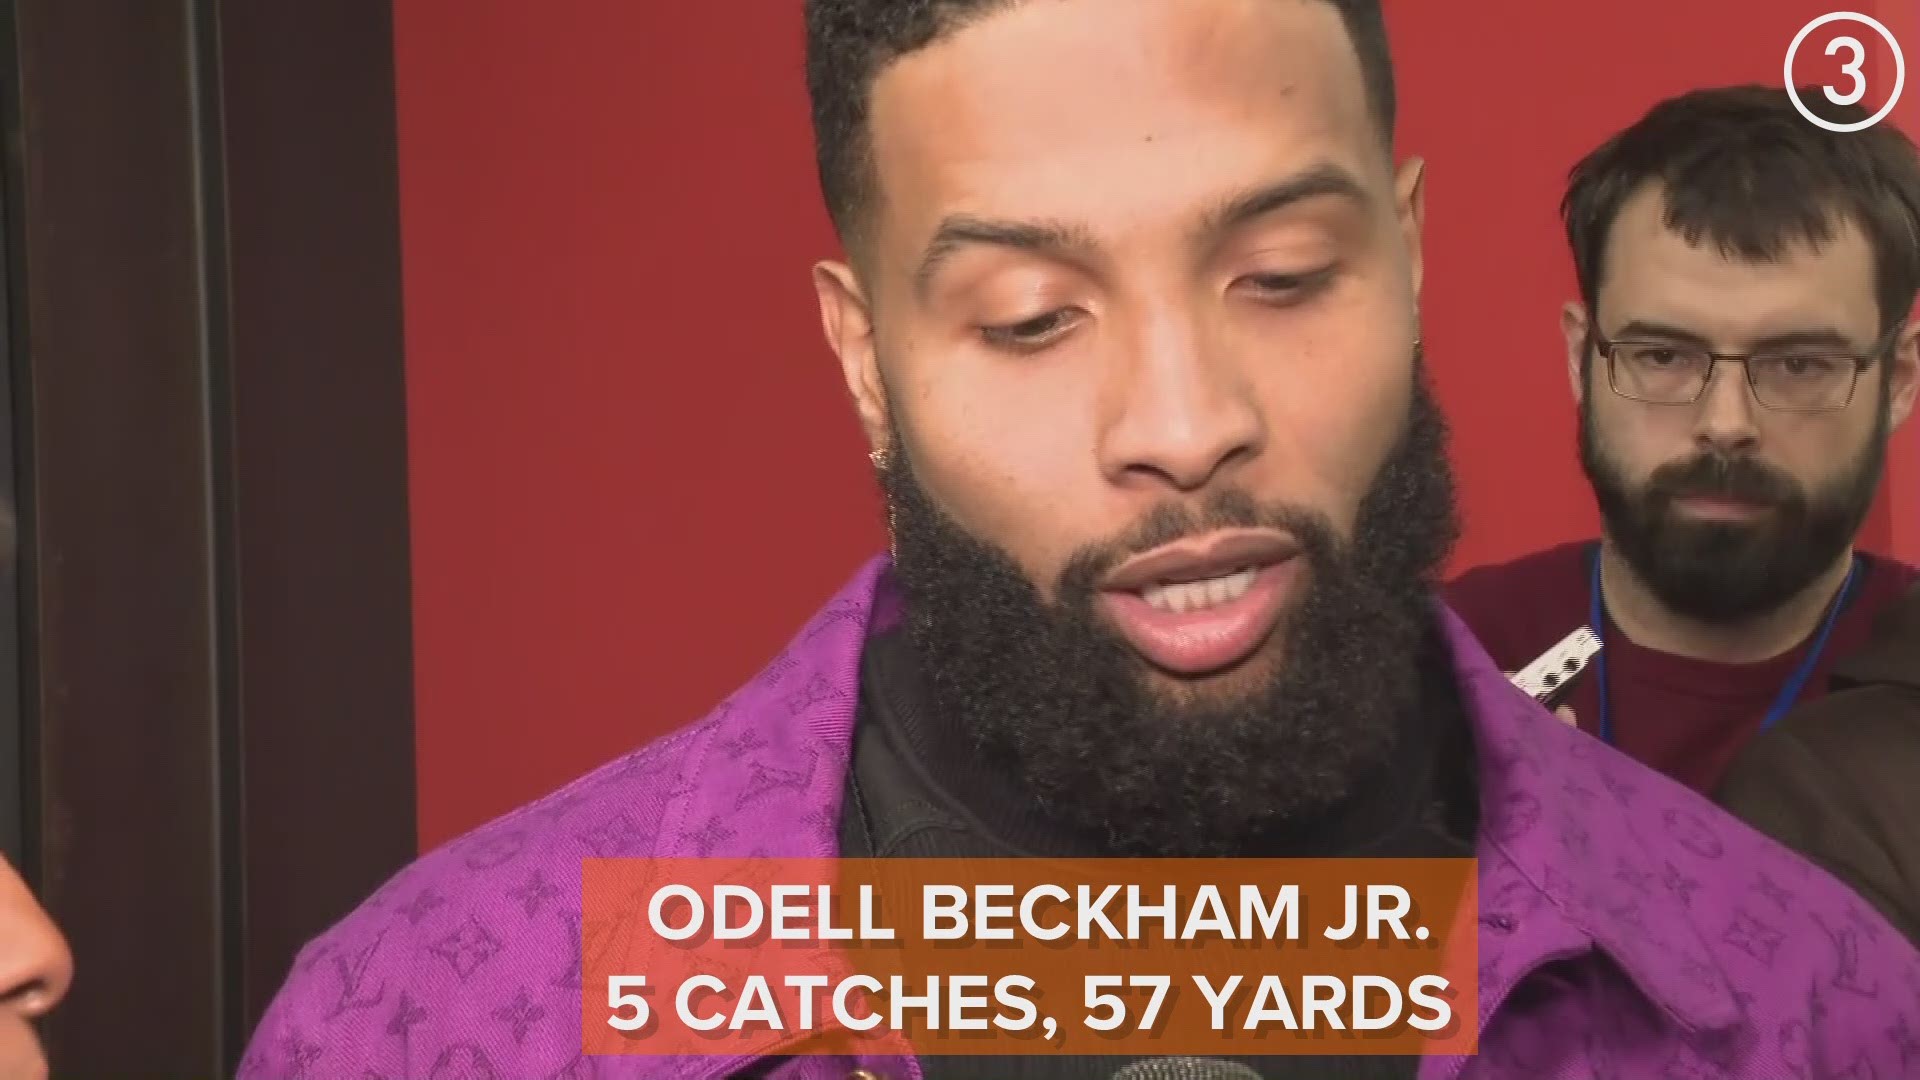 While his numbers might not have been eye-popping, the Cleveland Browns' use of Odell Beckham Jr. on Sunday was an improvement over previous weeks.